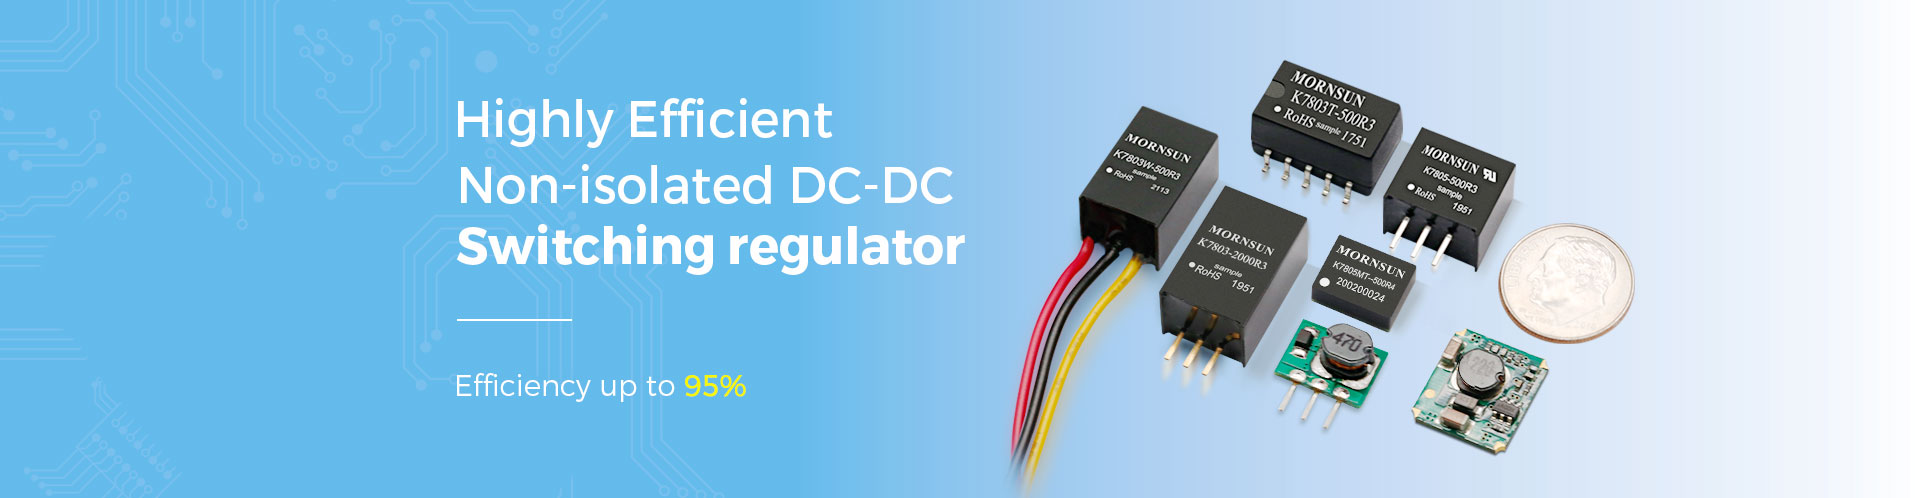 MORNSUN Highly Efficient Non-isolated DC-DC Switching Regulator